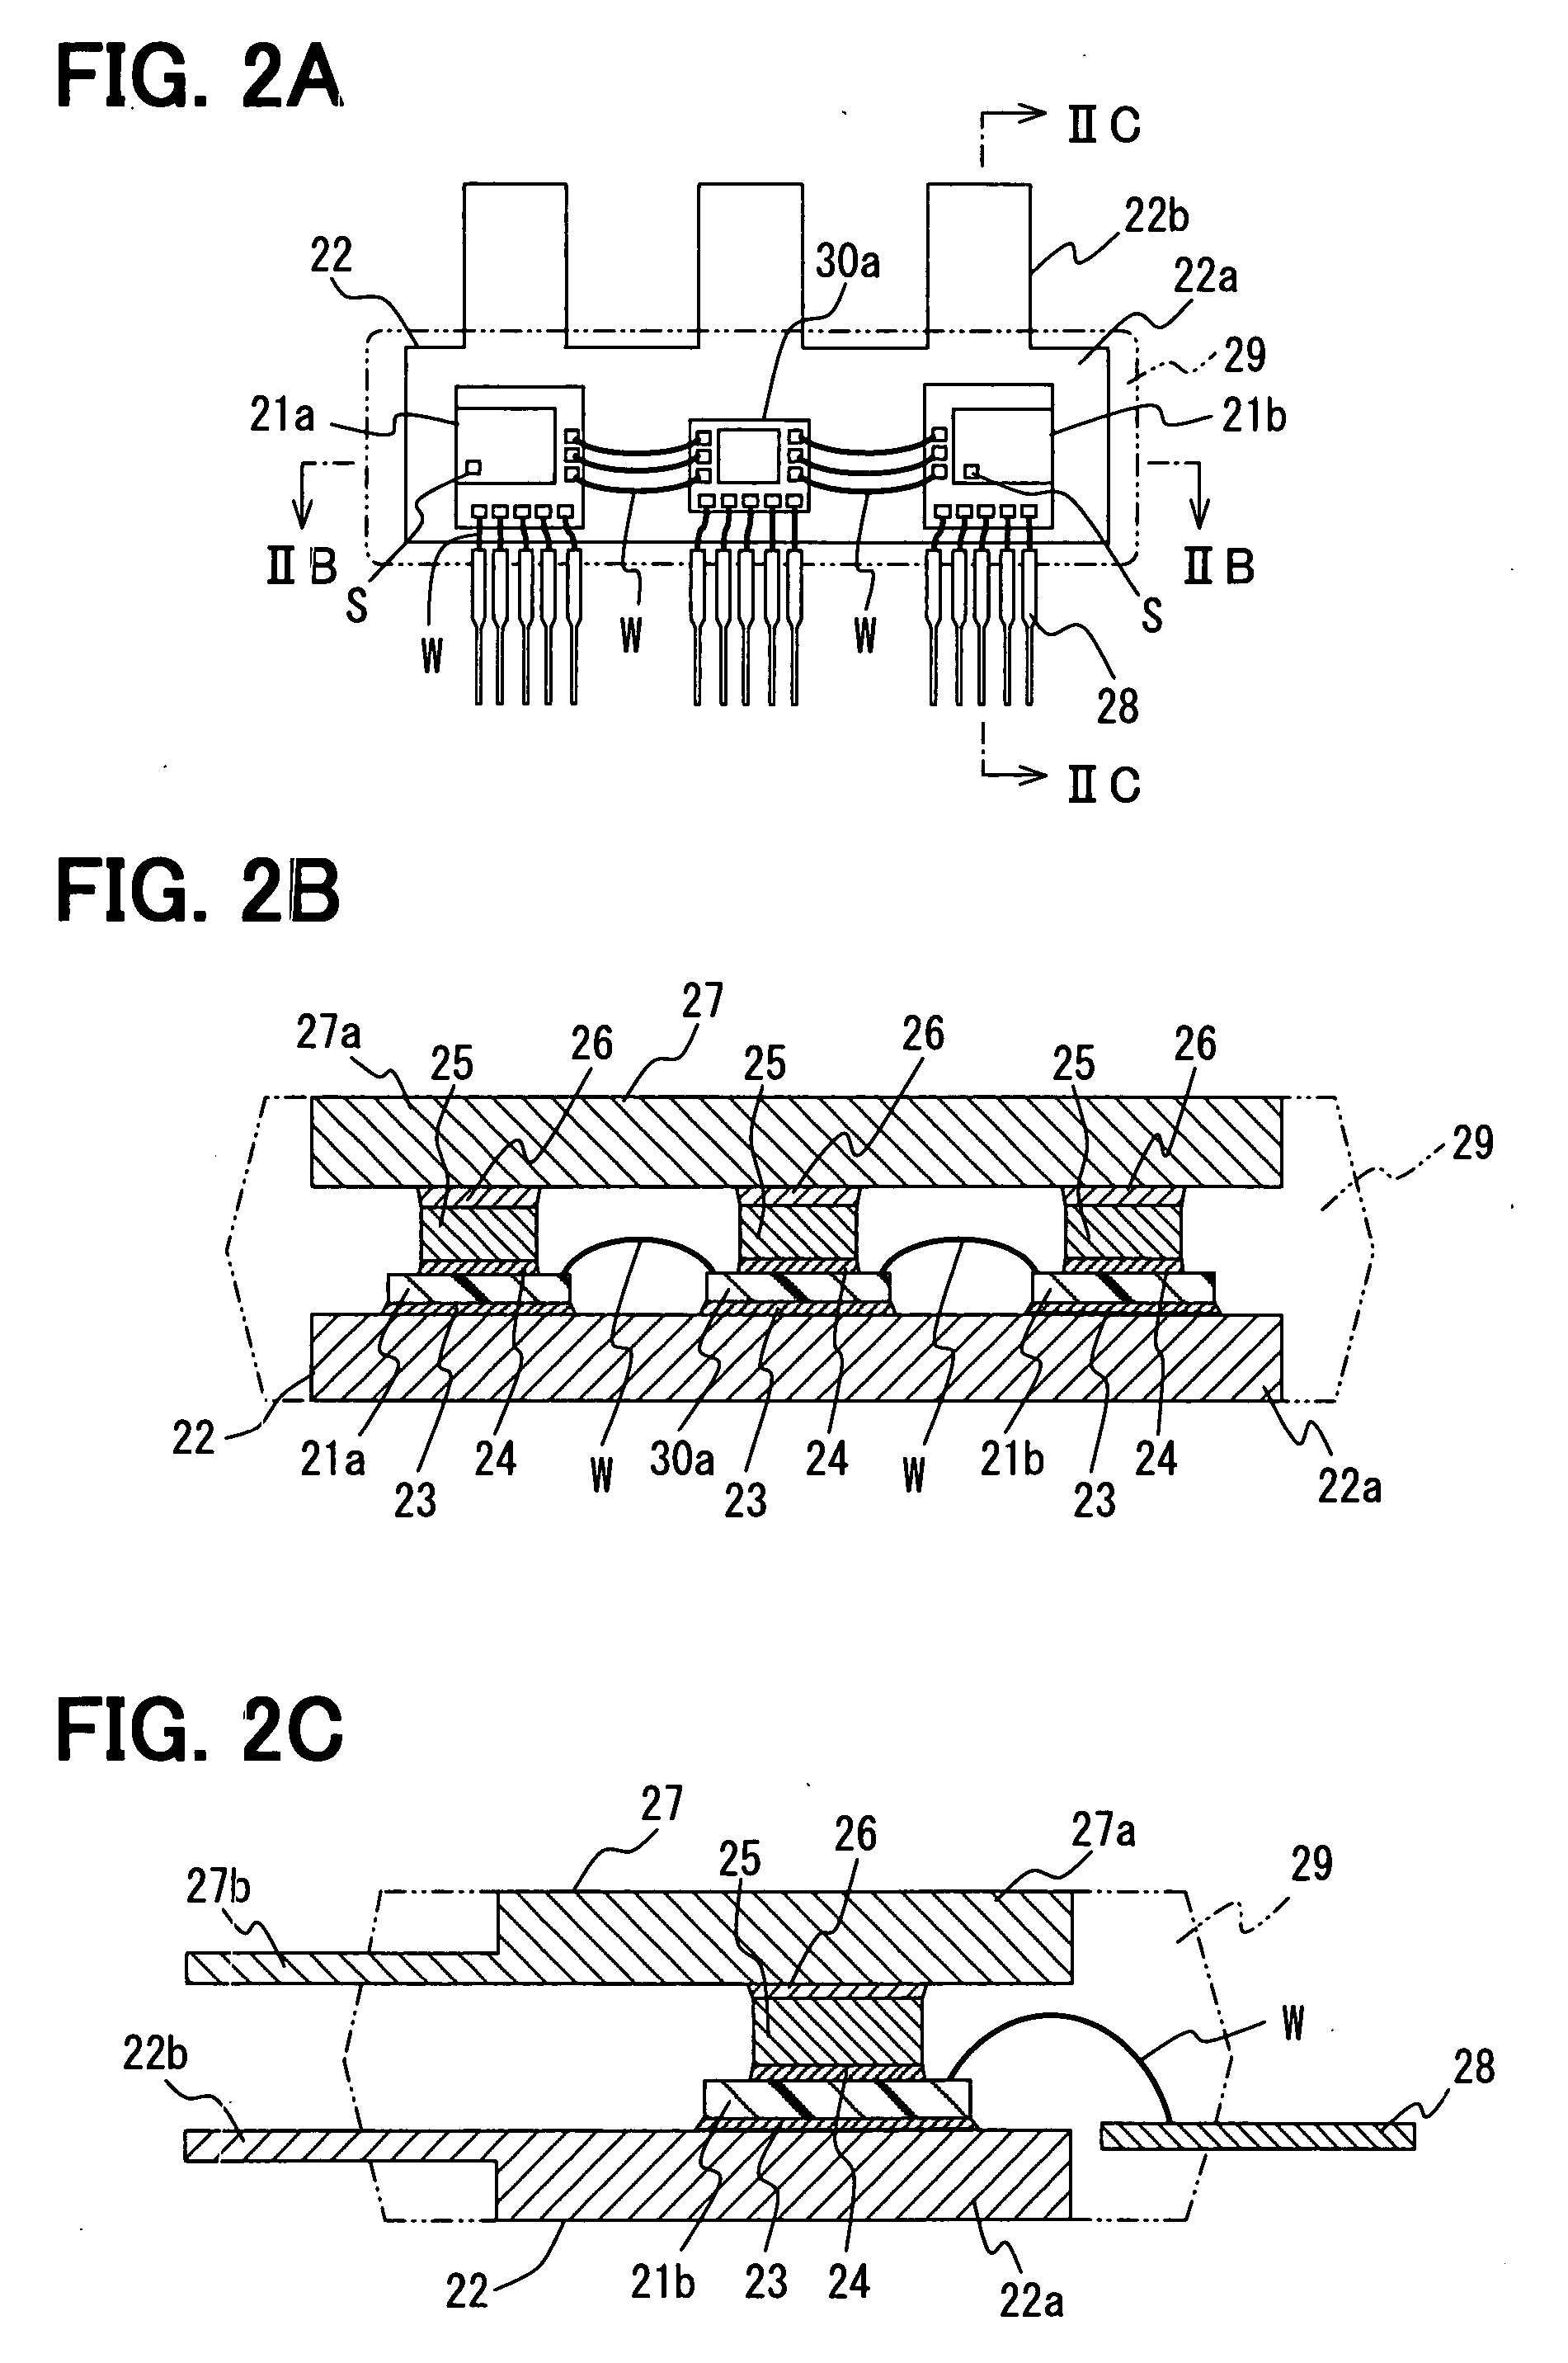 Loading driving device